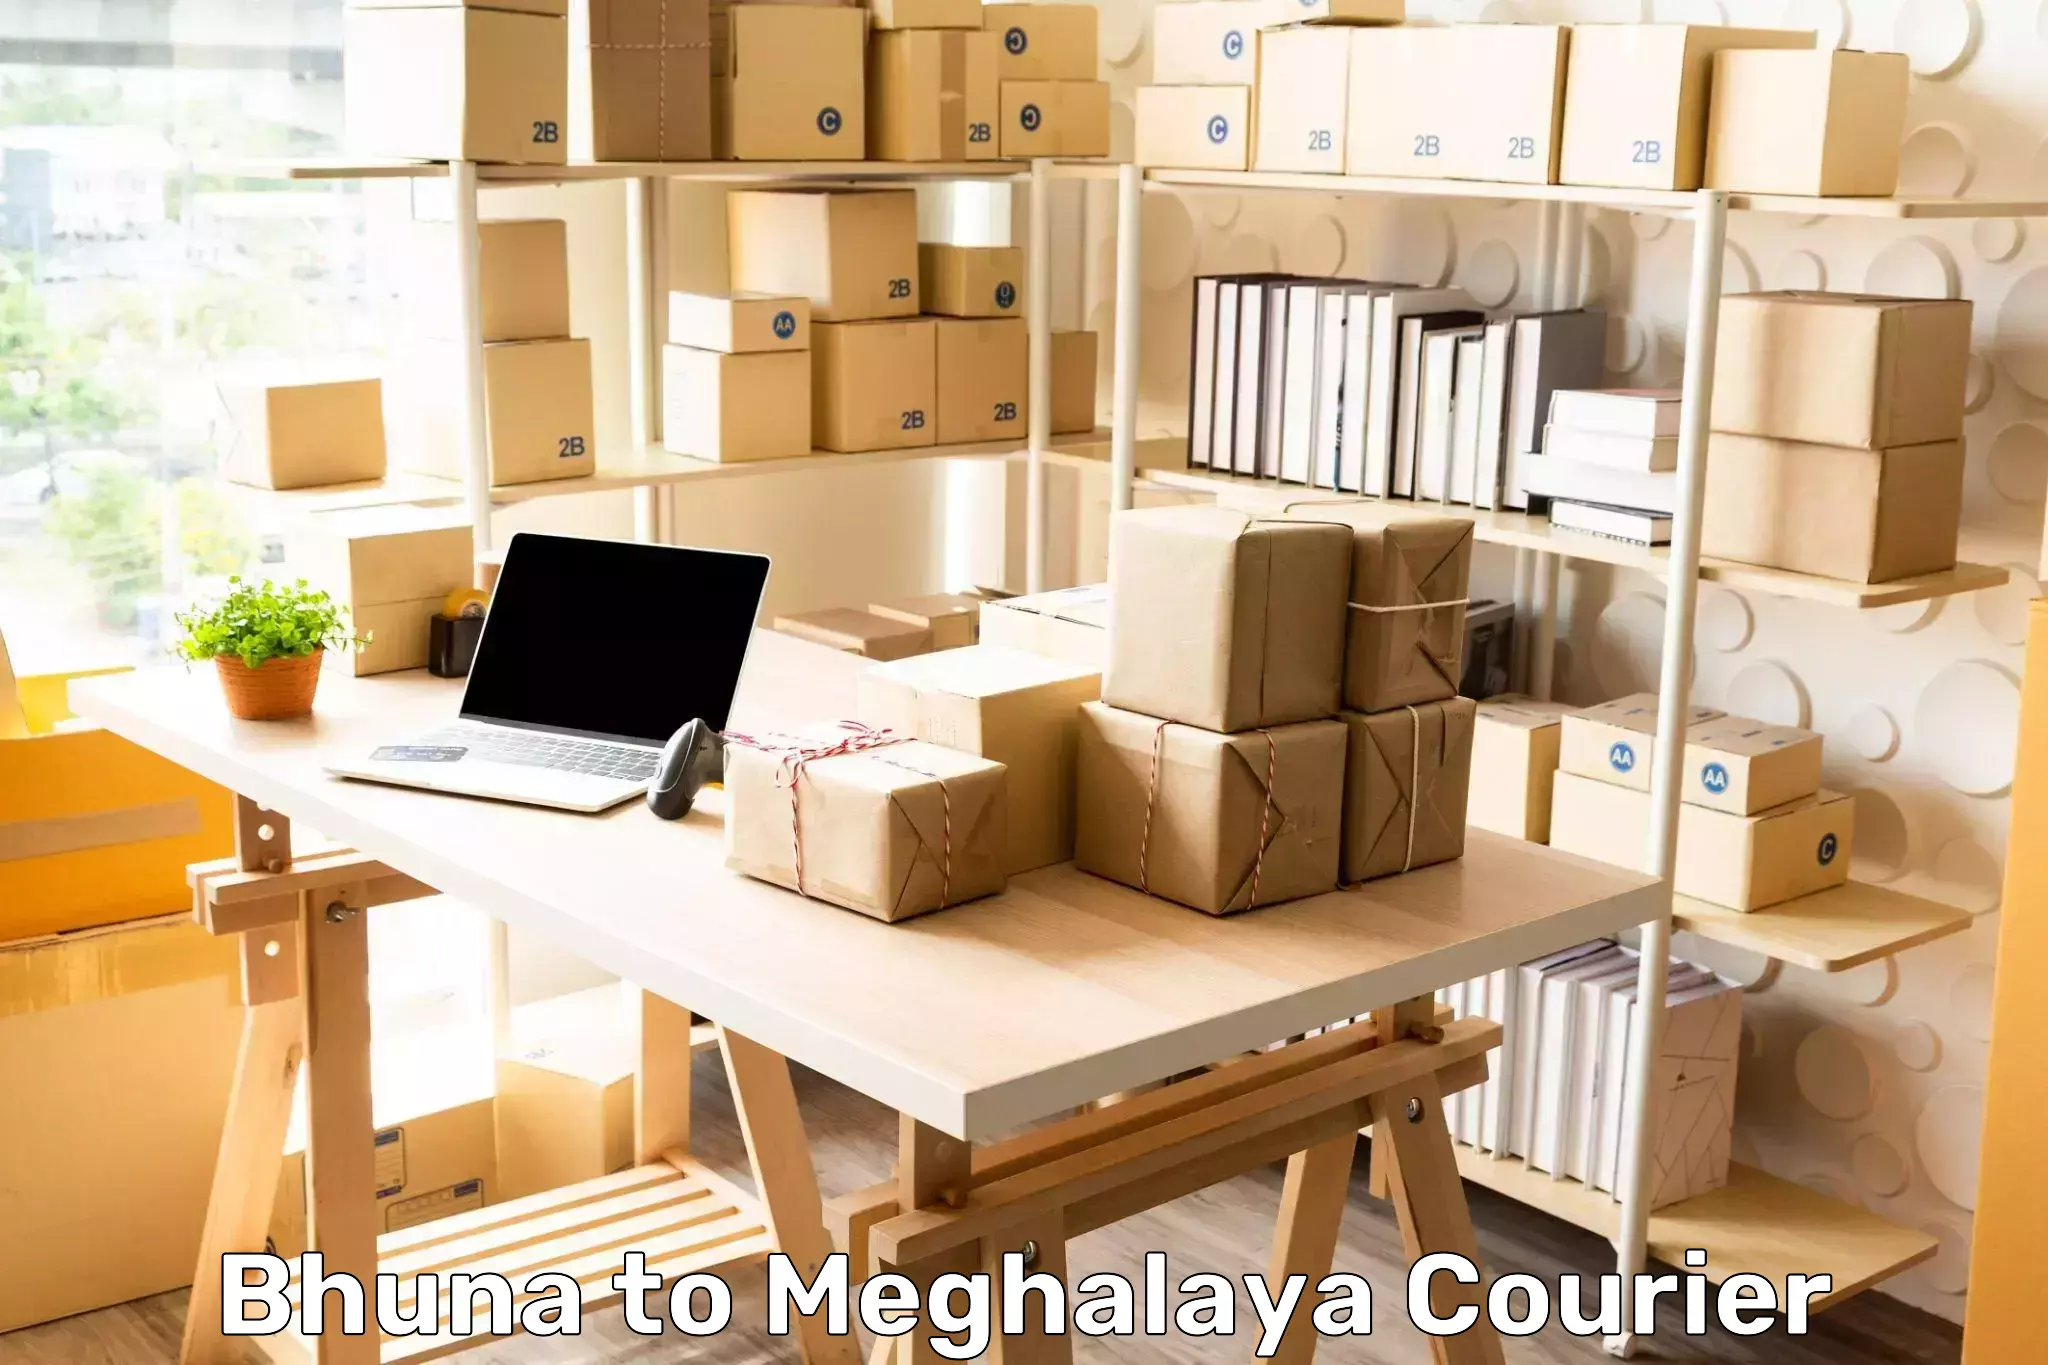 Overnight delivery services Bhuna to Meghalaya